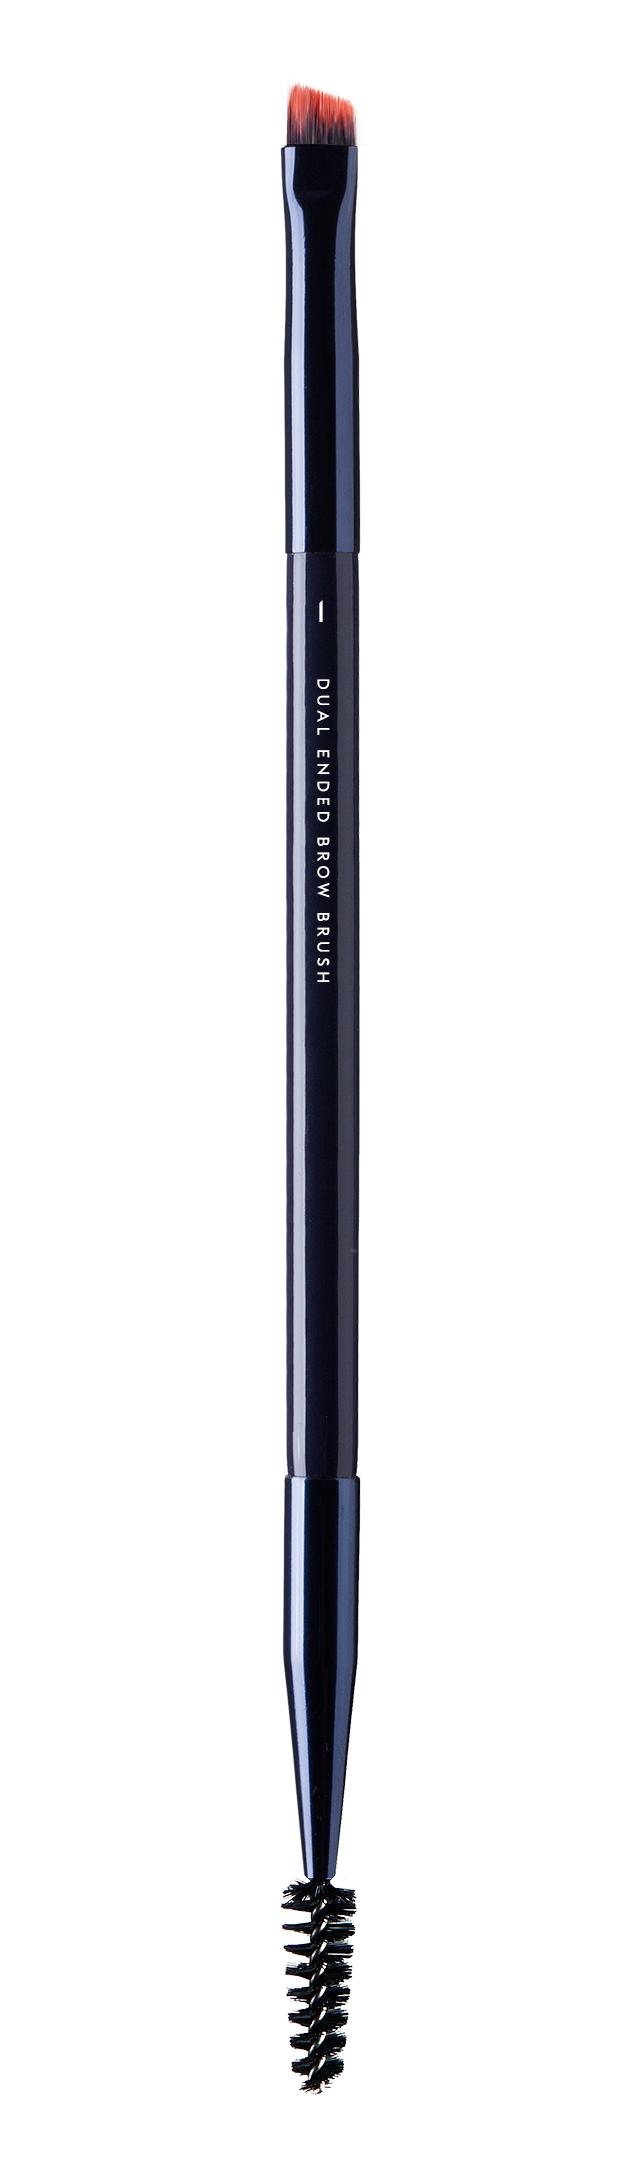 DUAL ENDED BROW BRUSH - 